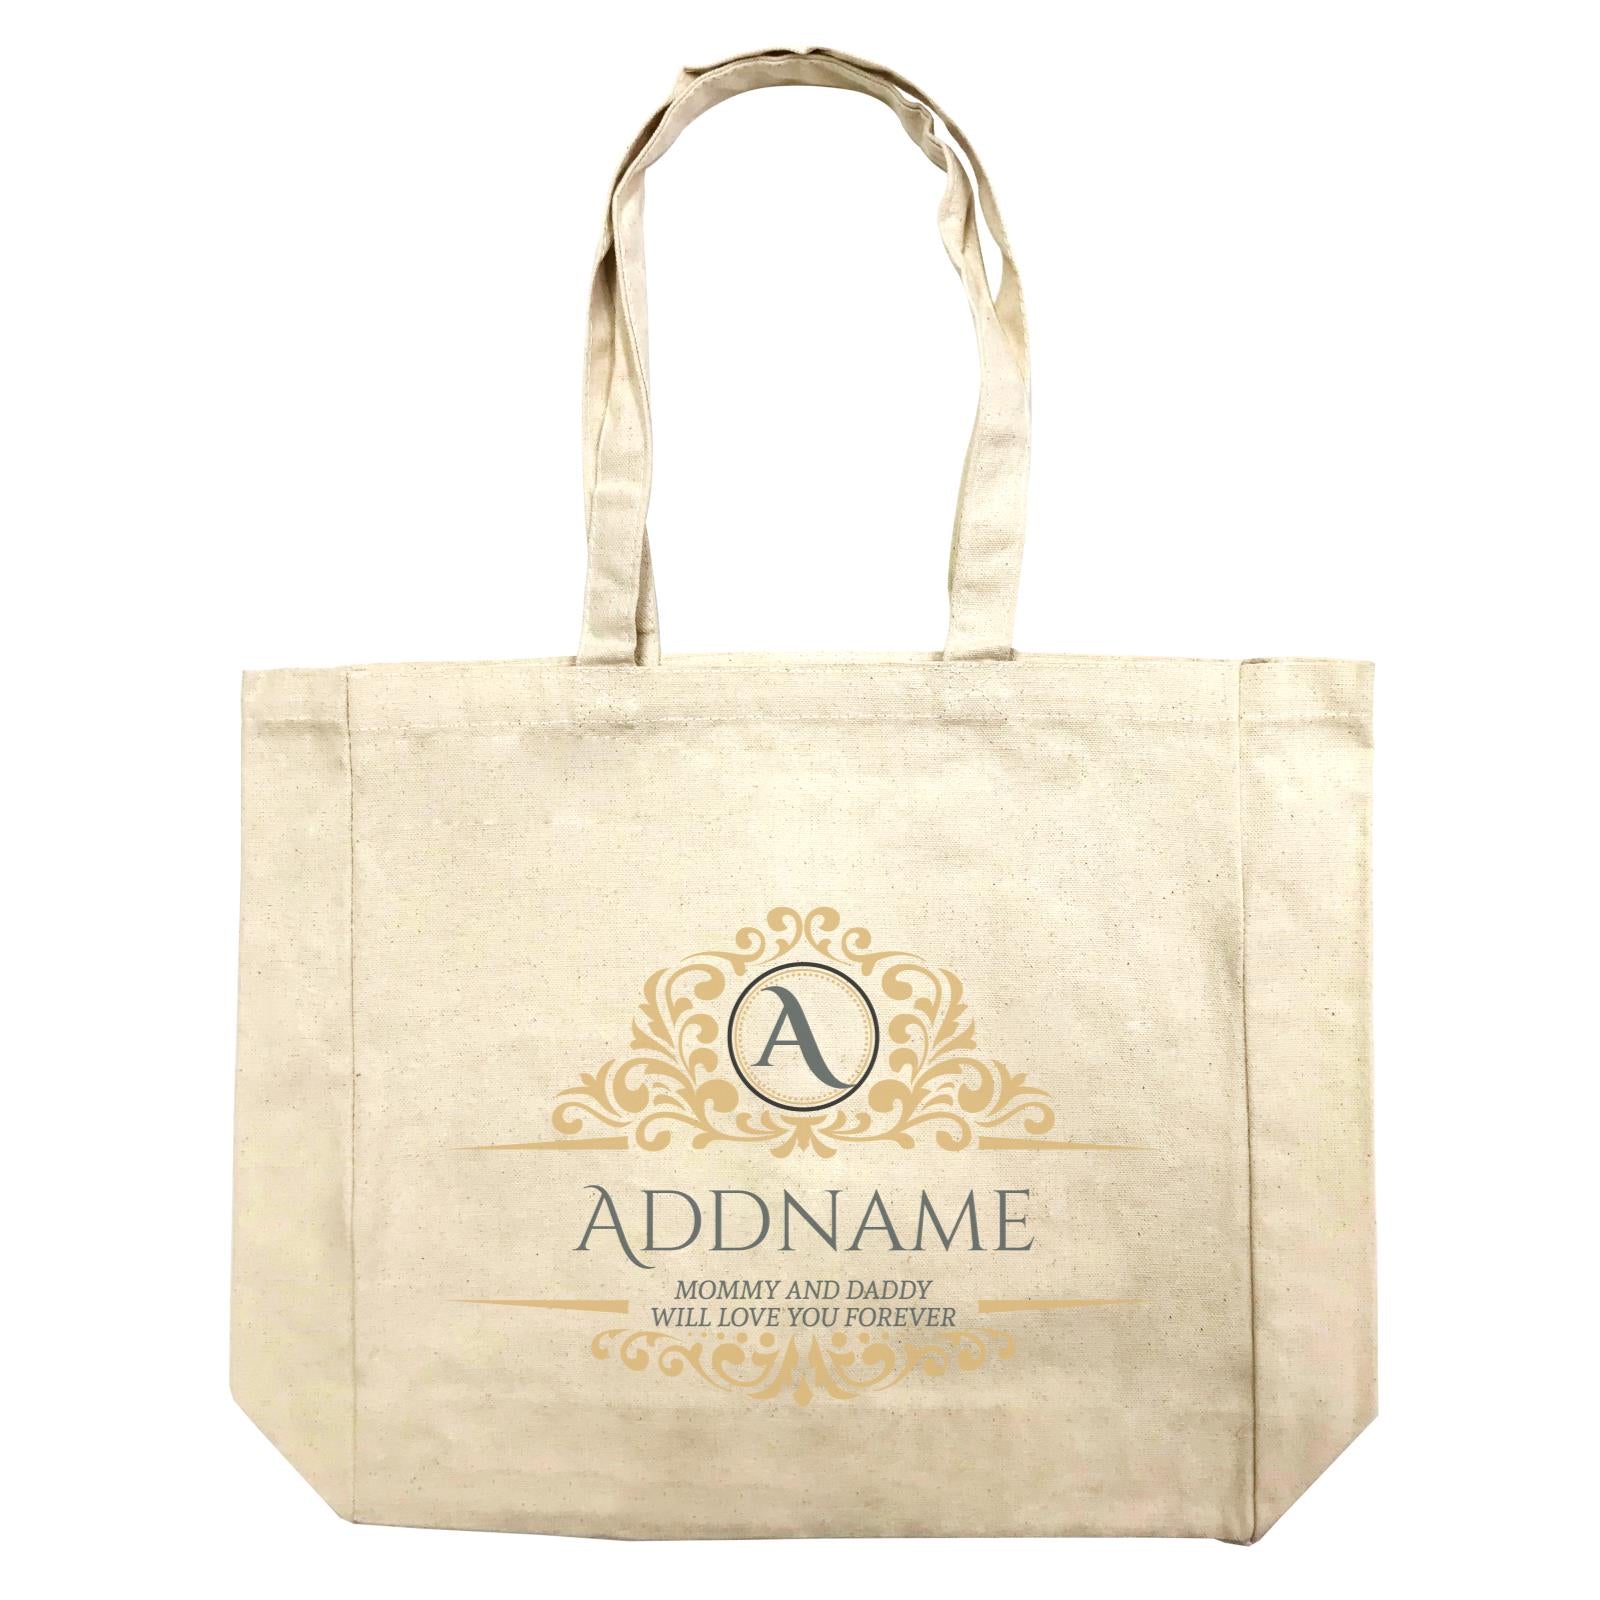 Royal Emblem Personalizable with Initial Name and Text Shopping Bag